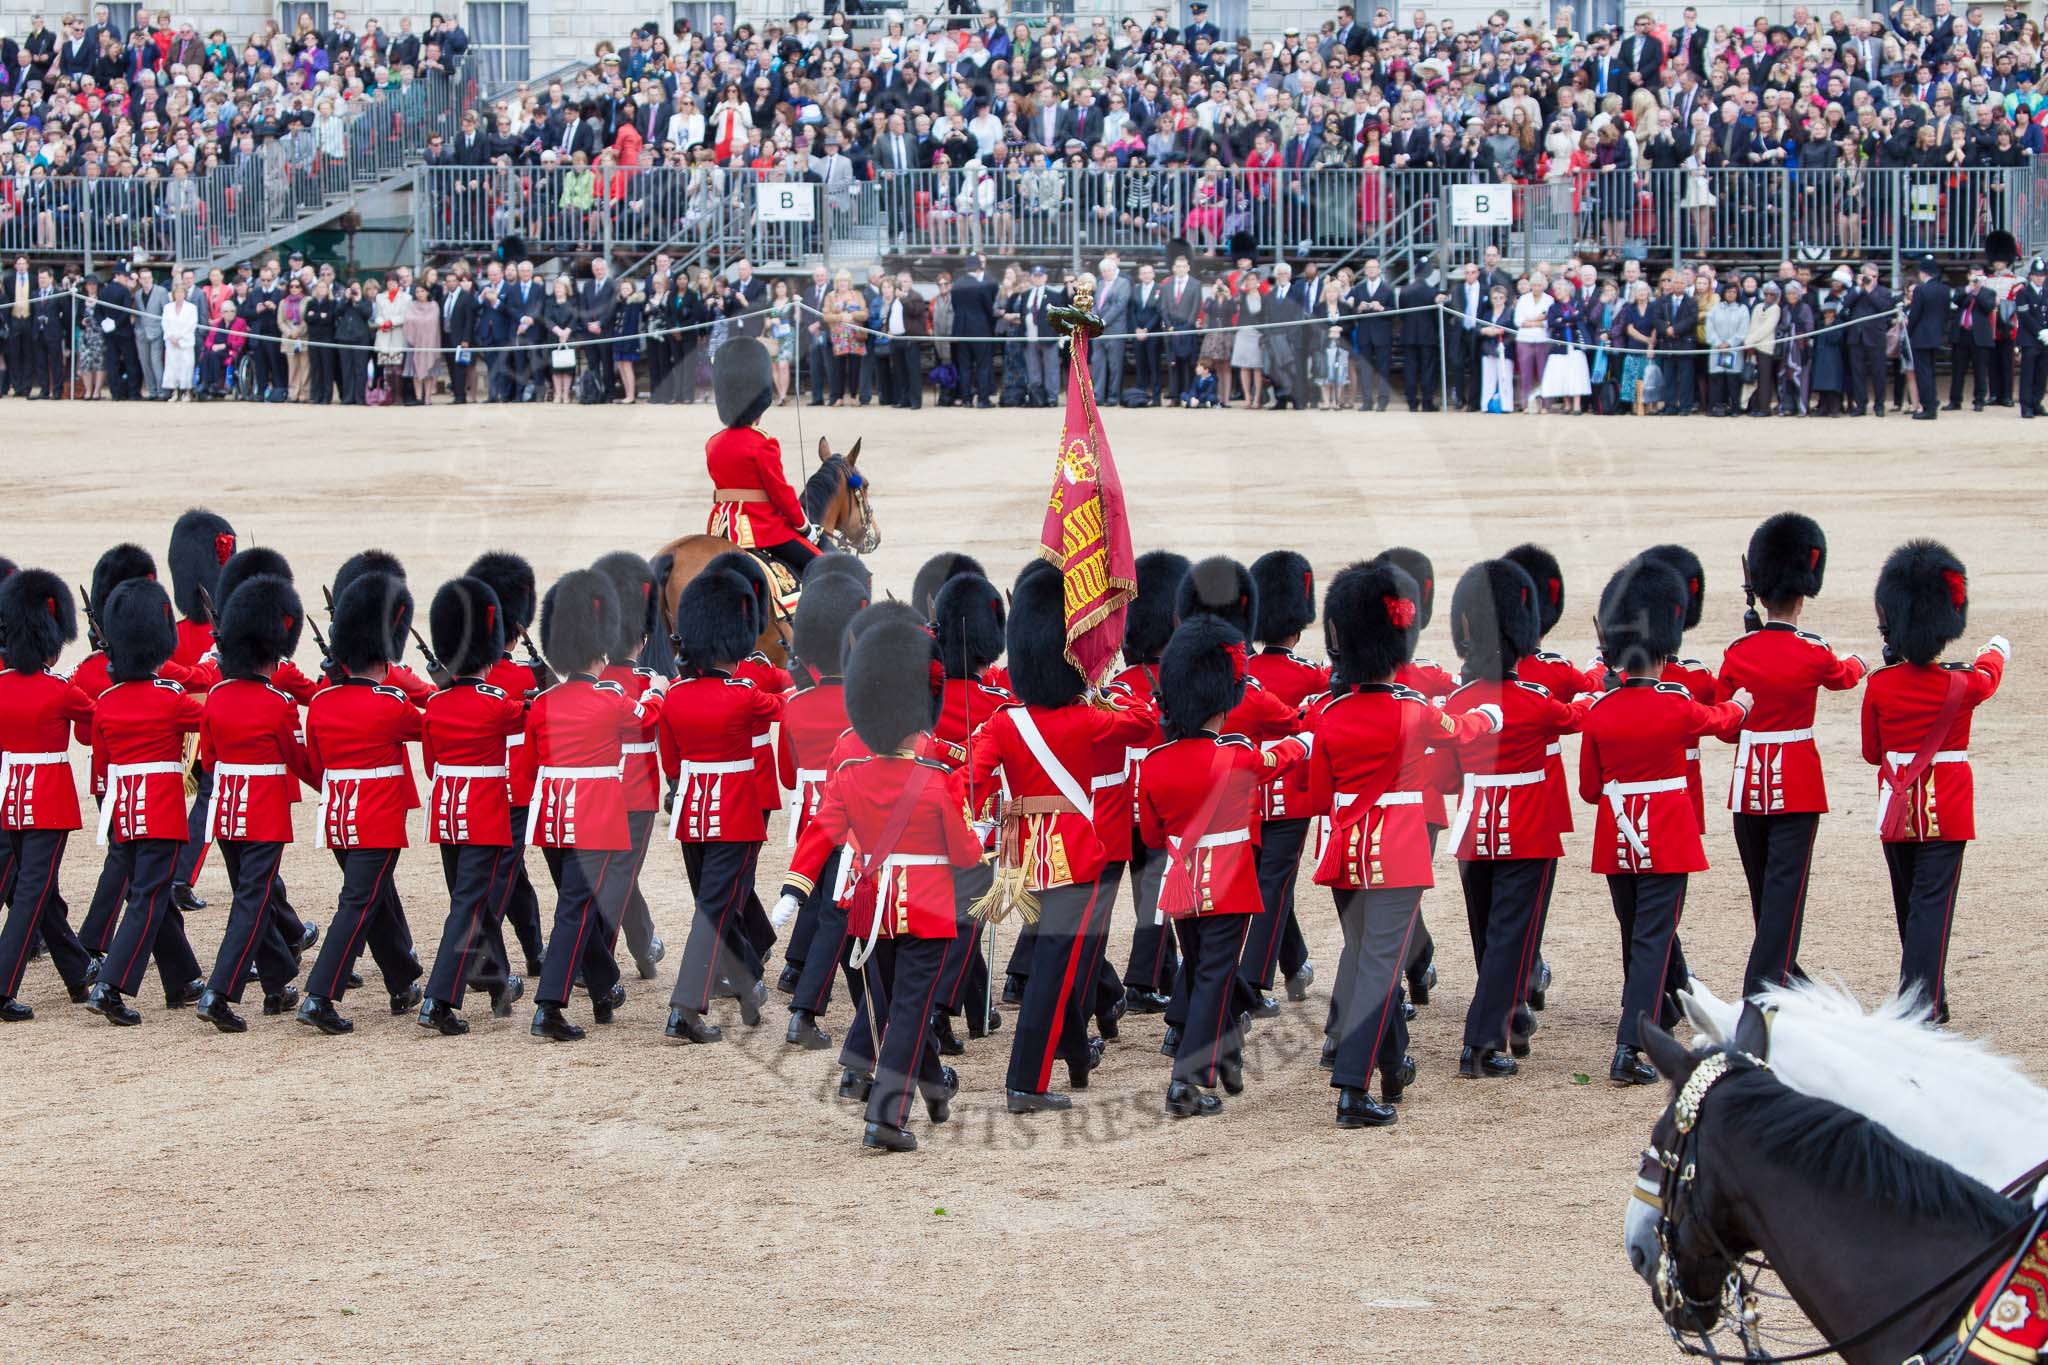 Trooping the Colour 2012: Parading the Colour in front of Her Majesty - No. 1 Guard, the Escort to the Colour, during the second round of the March Past..
Horse Guards Parade, Westminster,
London SW1,

United Kingdom,
on 16 June 2012 at 11:46, image #491